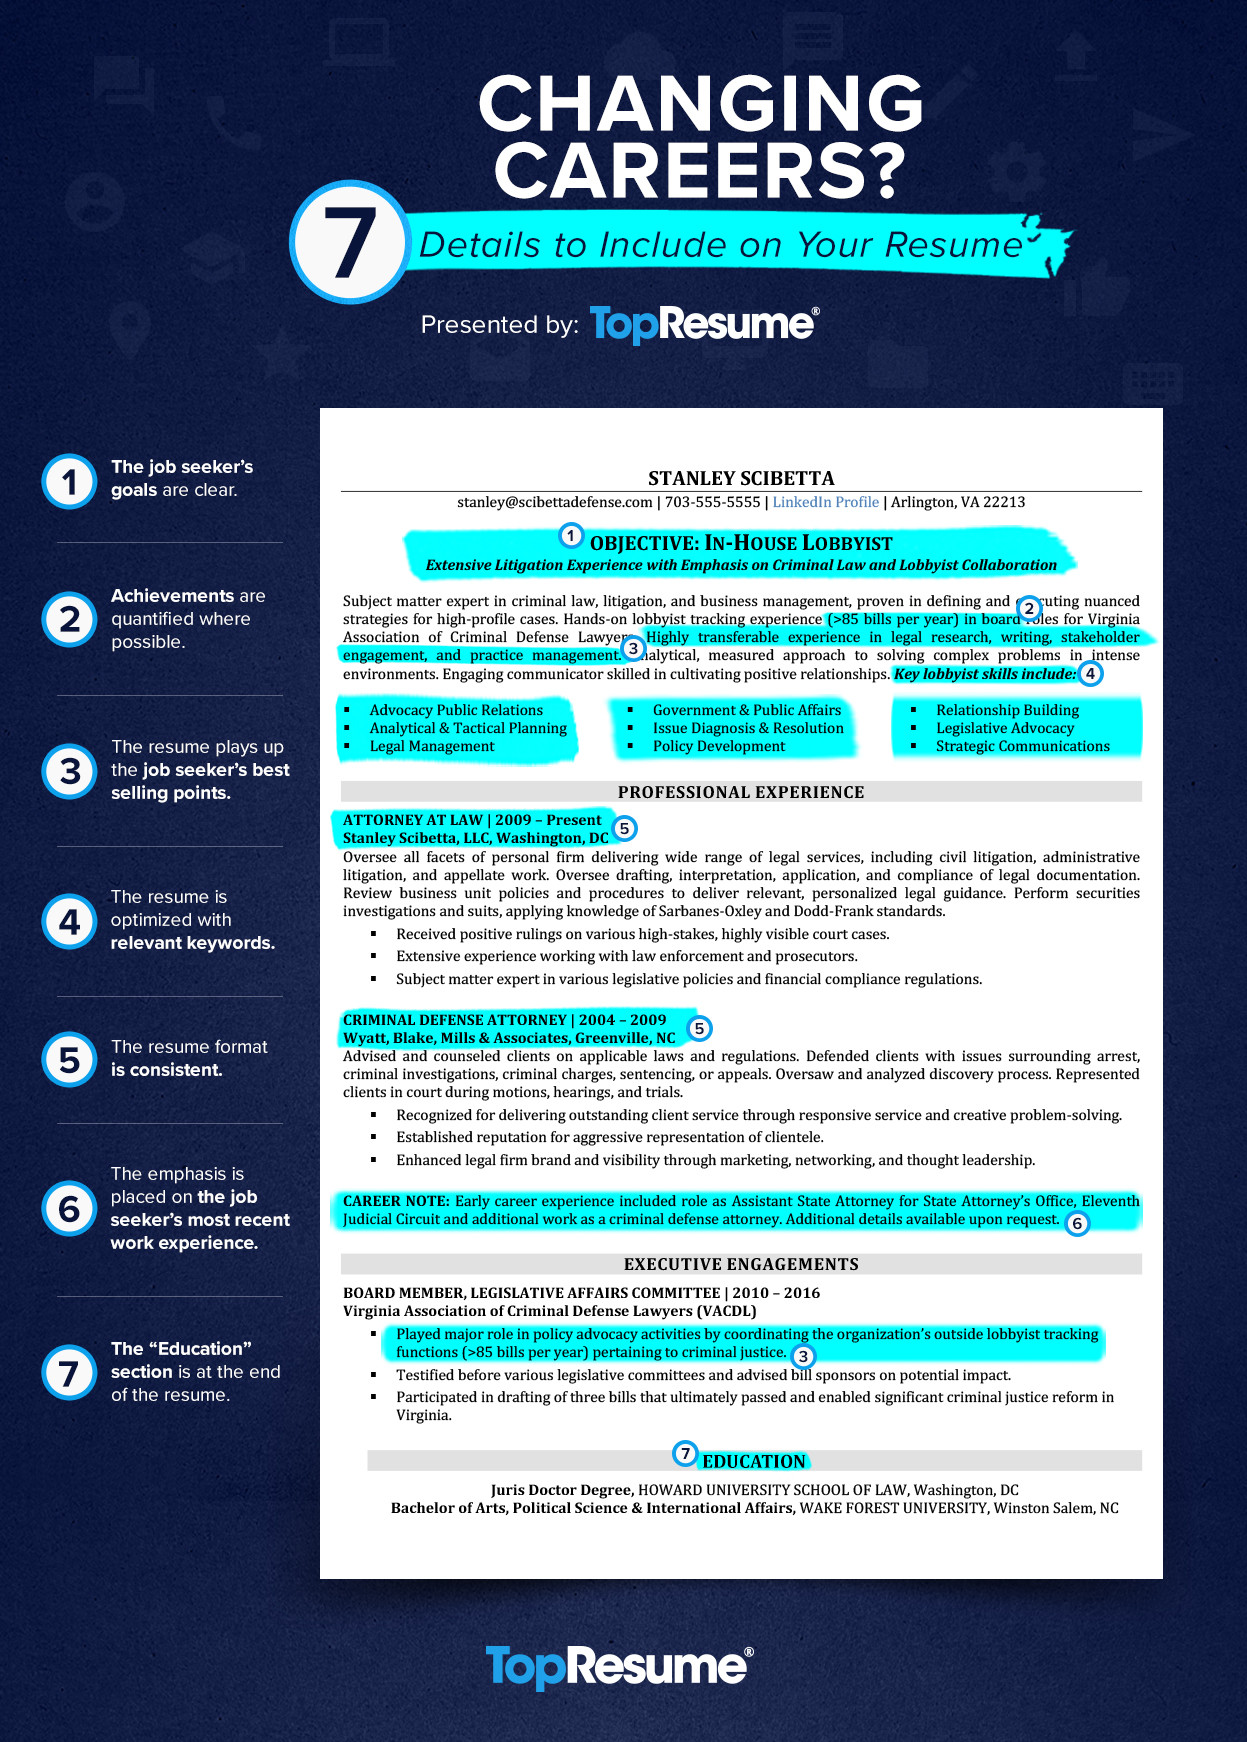 Transitioning Industries for Career Change Resume Objective Samples Changing Careers? 7 Details to Include On Your Resume topresume